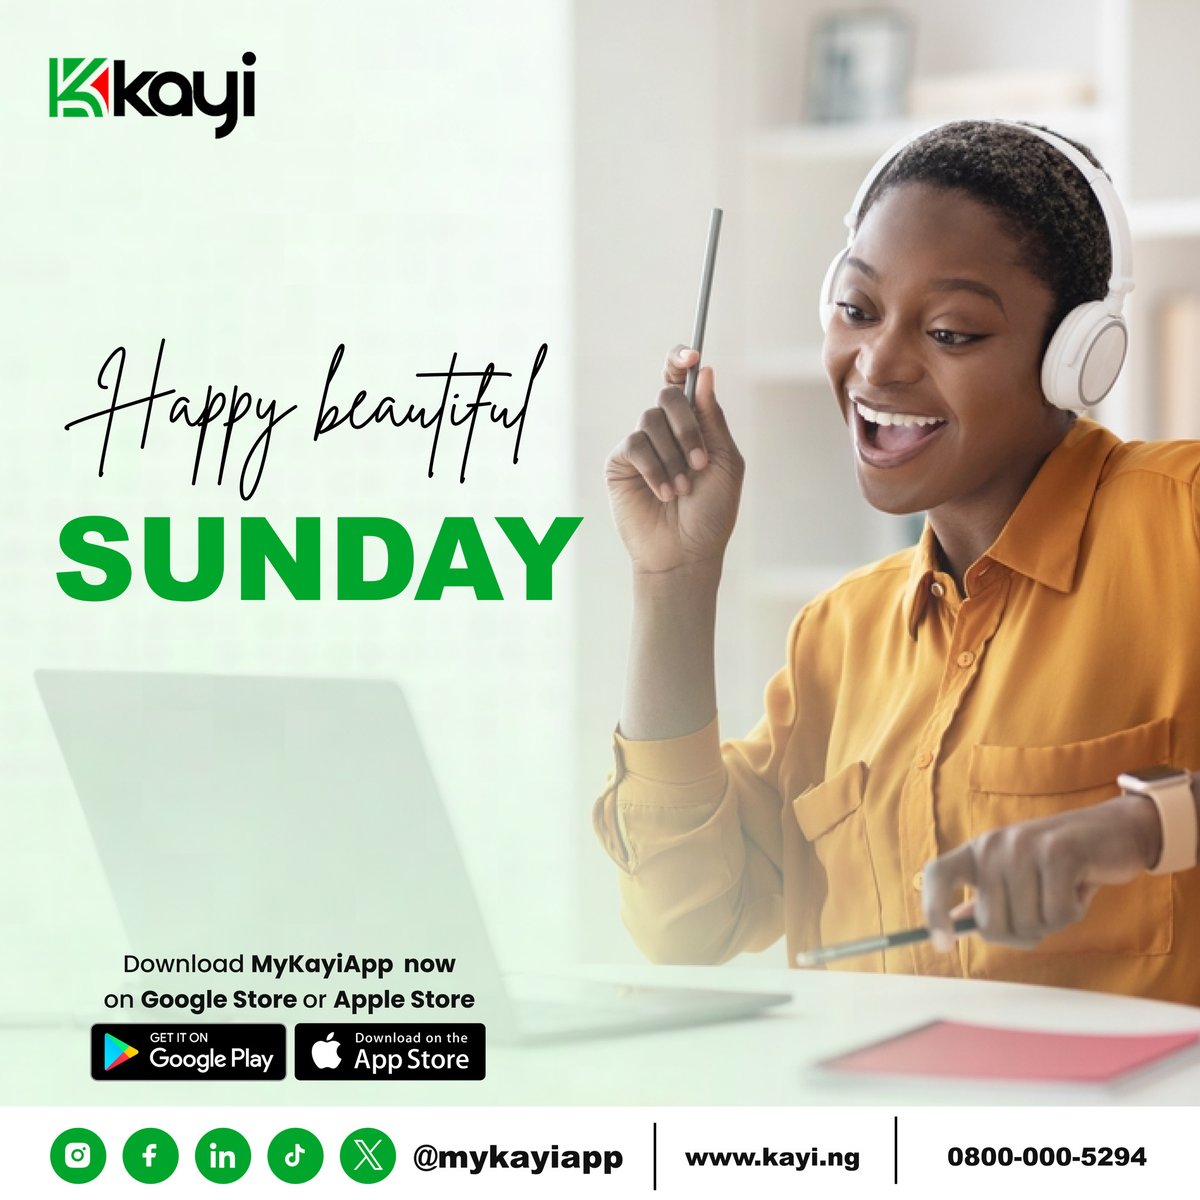 Happy beautiful Sunday. Download MyKayiApp now on Google Store or Apple Store and embrace the future of banking.

#MyKayiApp #NowLive #Kayiway #DownloadNow #Bankingwithoutlimits #downloadmykayiapp